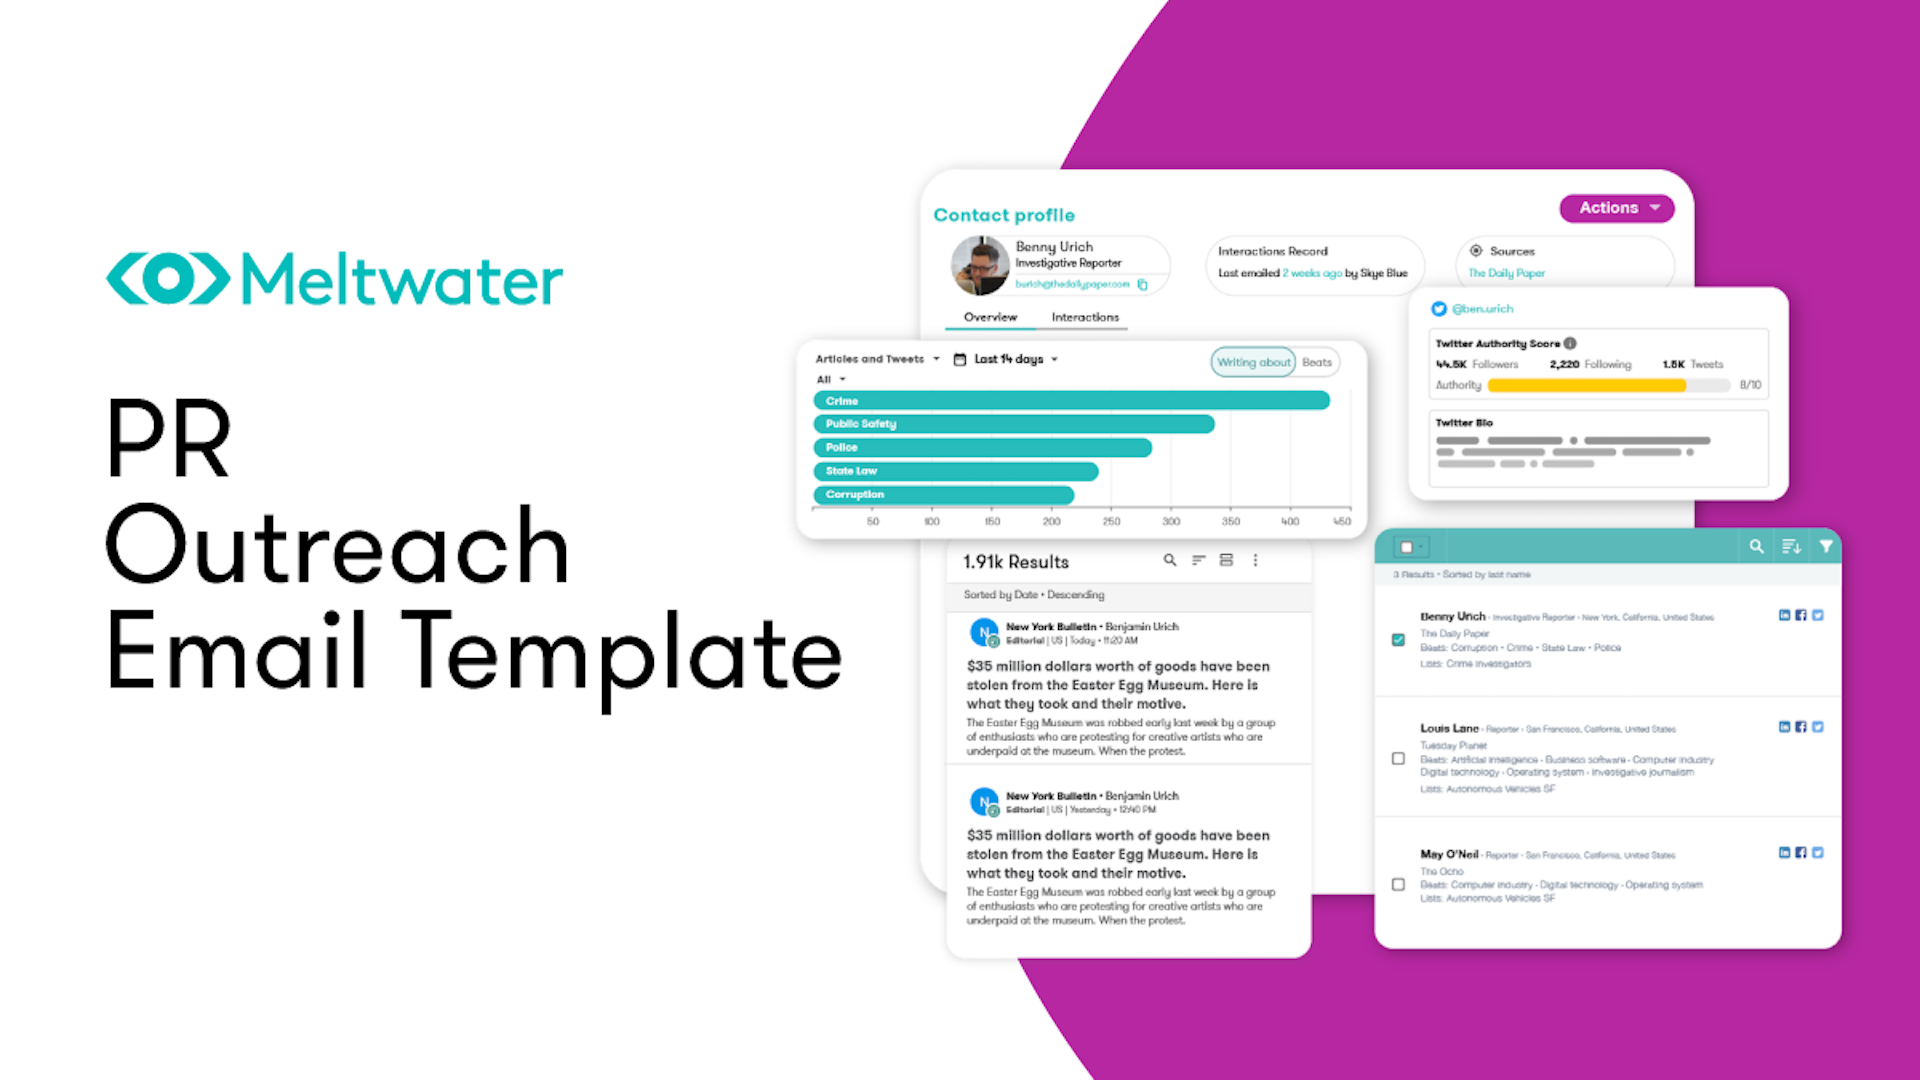 Image of the widgets within Meltwater's PR solution with the text PR Outreach Email Template